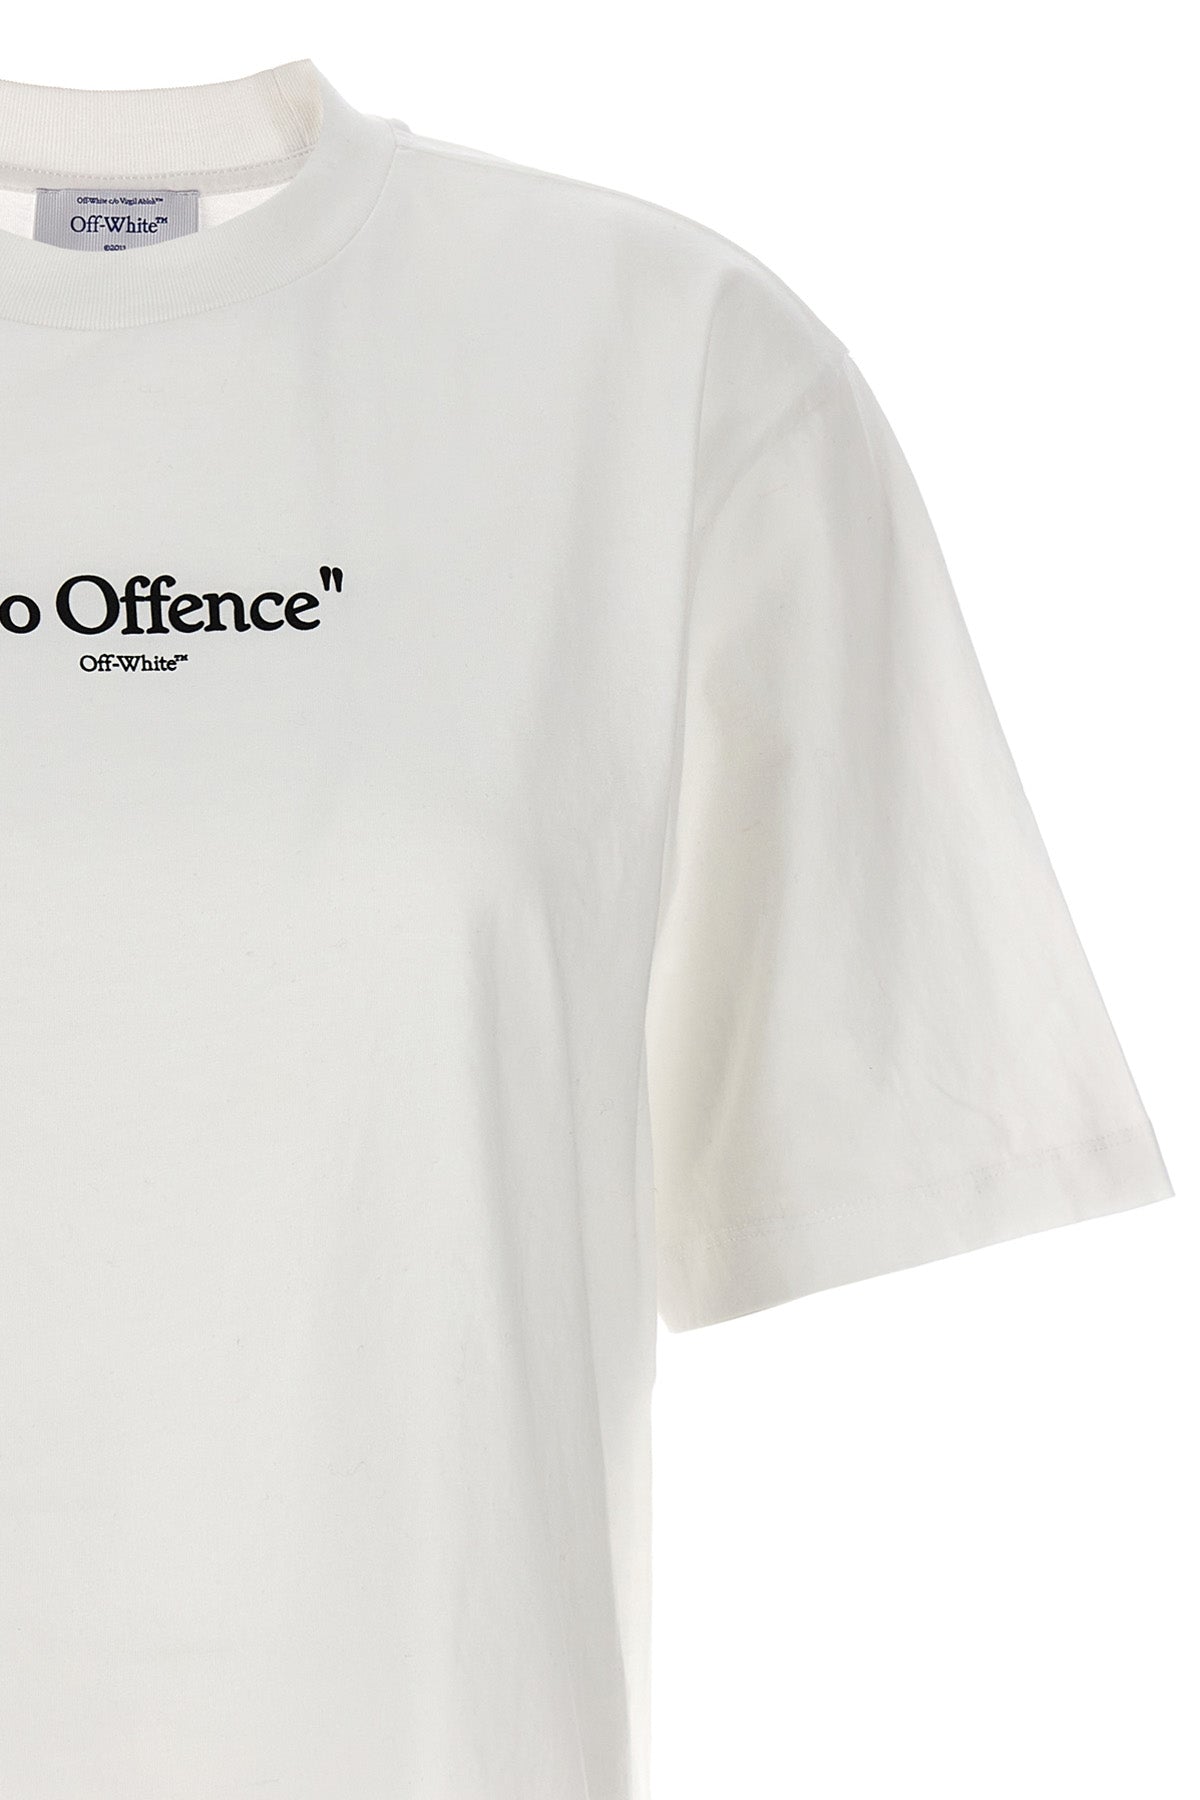 OFF-WHITE 'NO OFFENCE' T-SHIRT